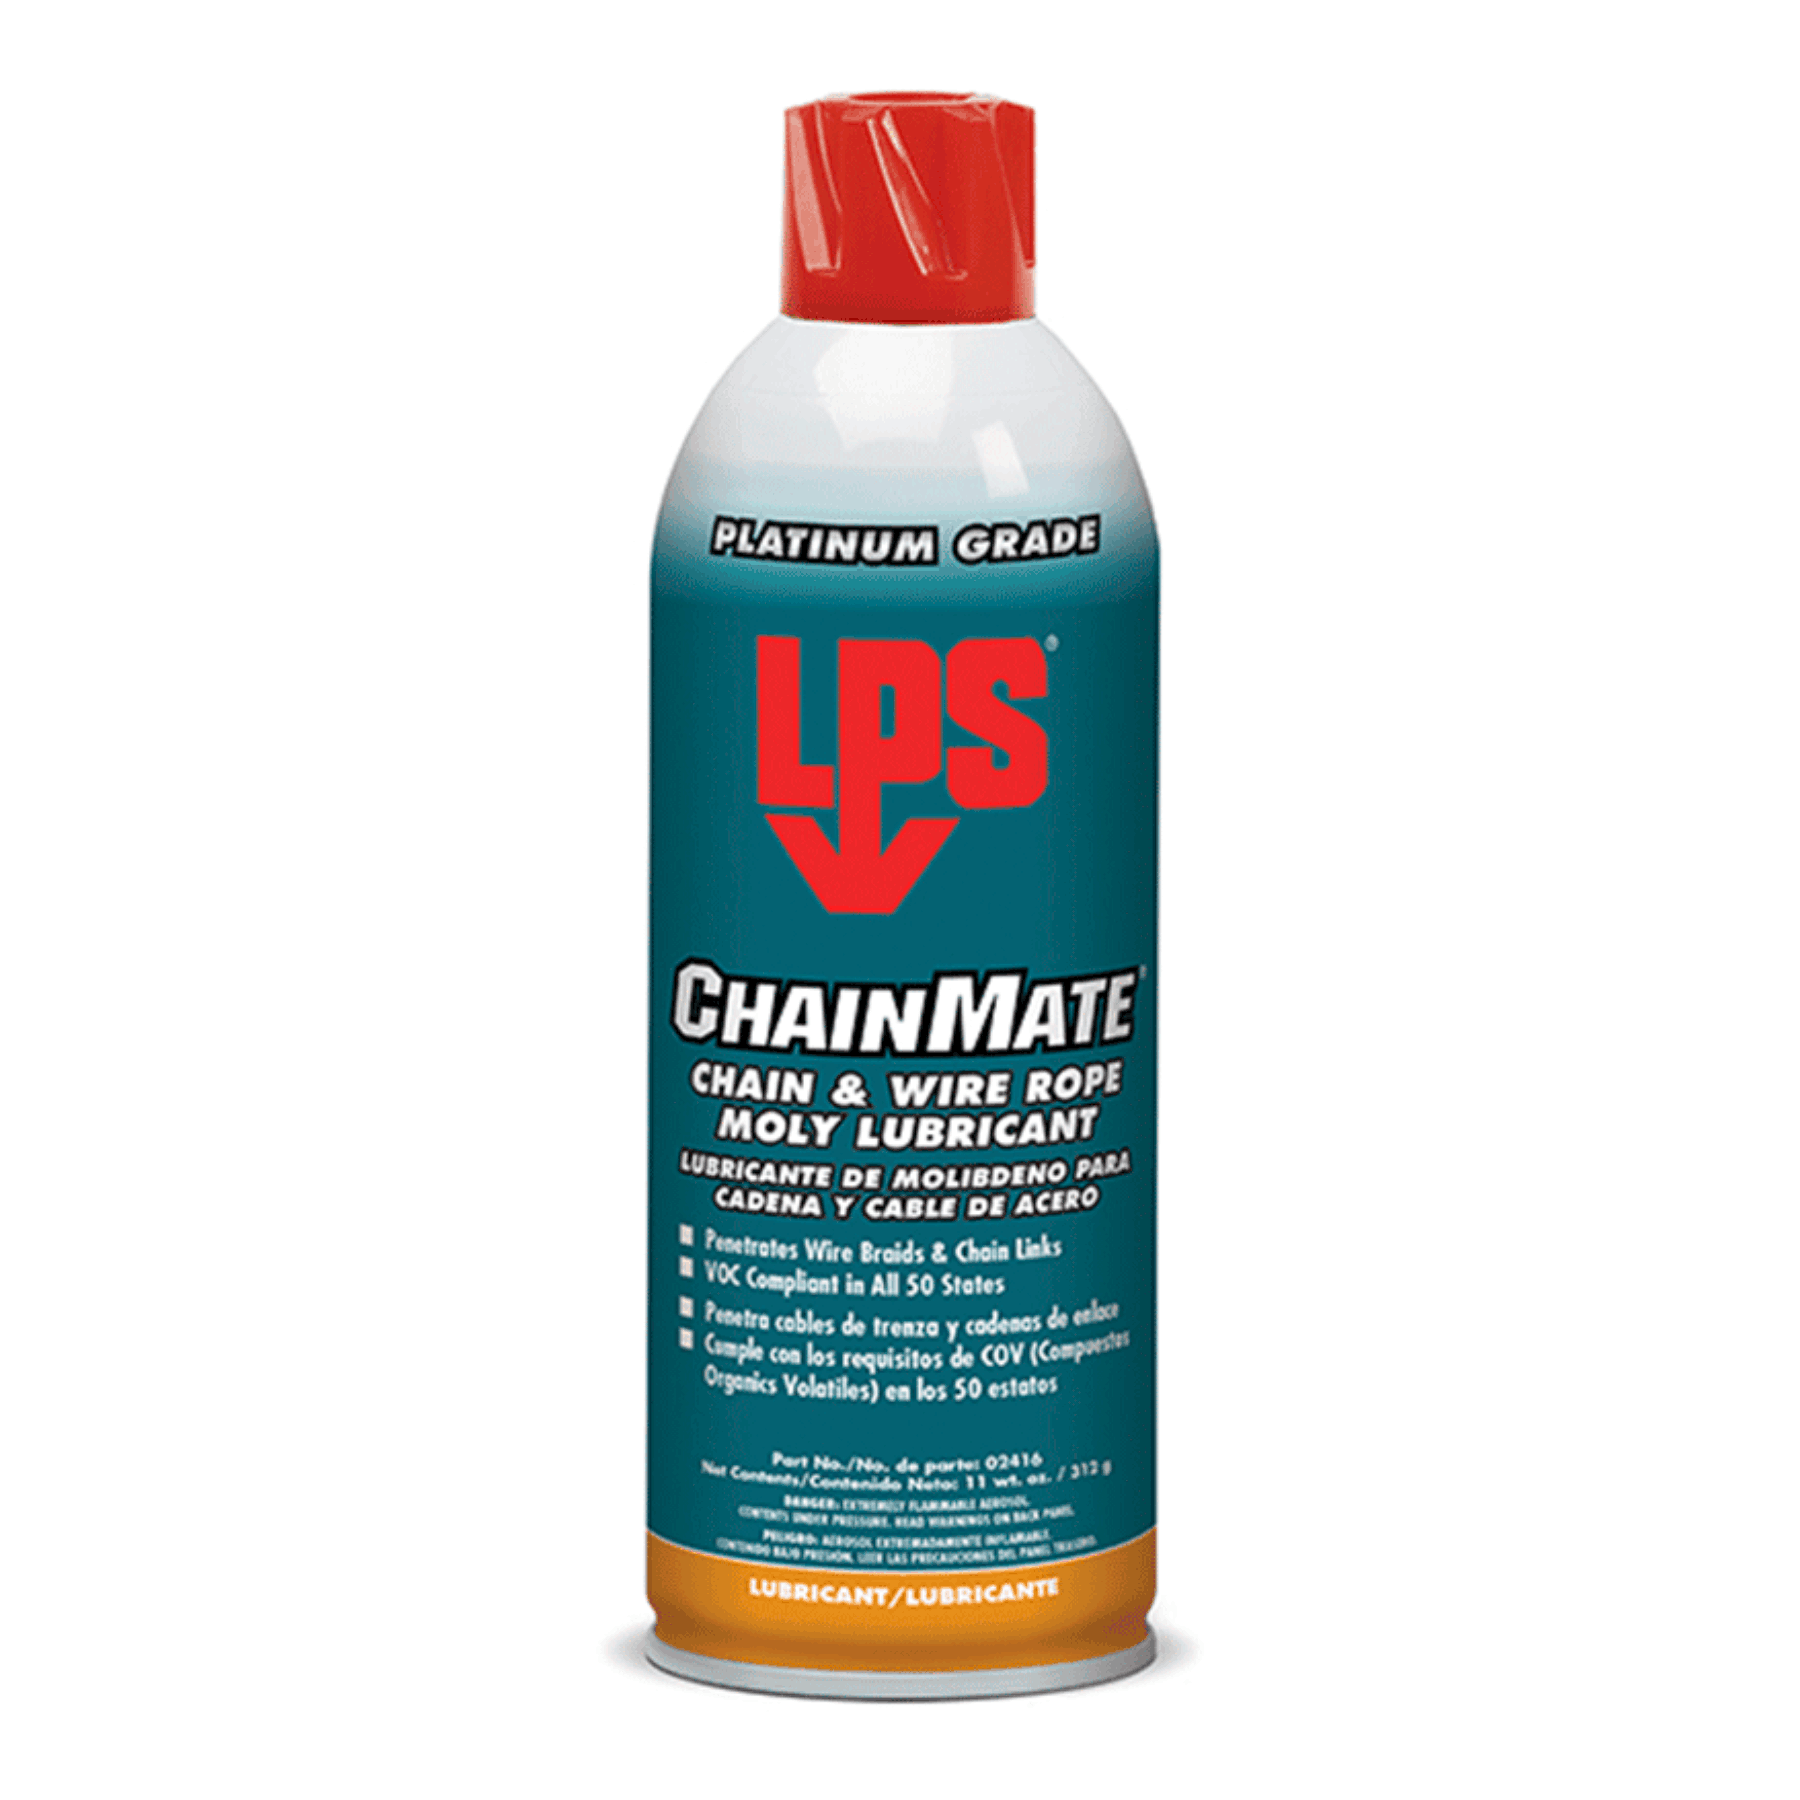 LPS CHAINMATE CHAIN & WIRE ROPE LUBRICANT | LUBRICANTE PARA CADENAS 02416